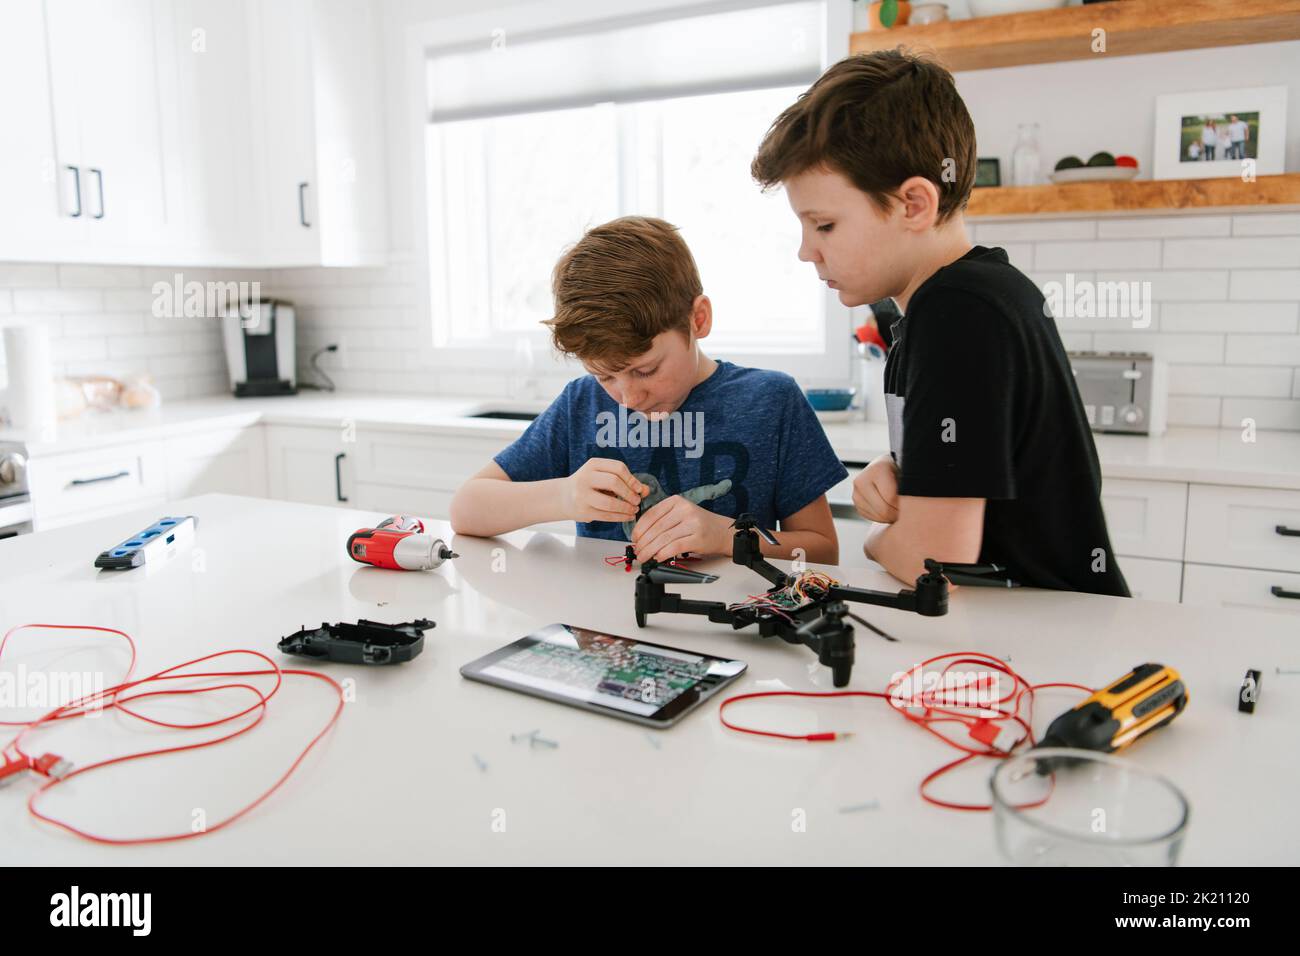 Brothers learning to assemble drone at kitchen counter Stock Photo